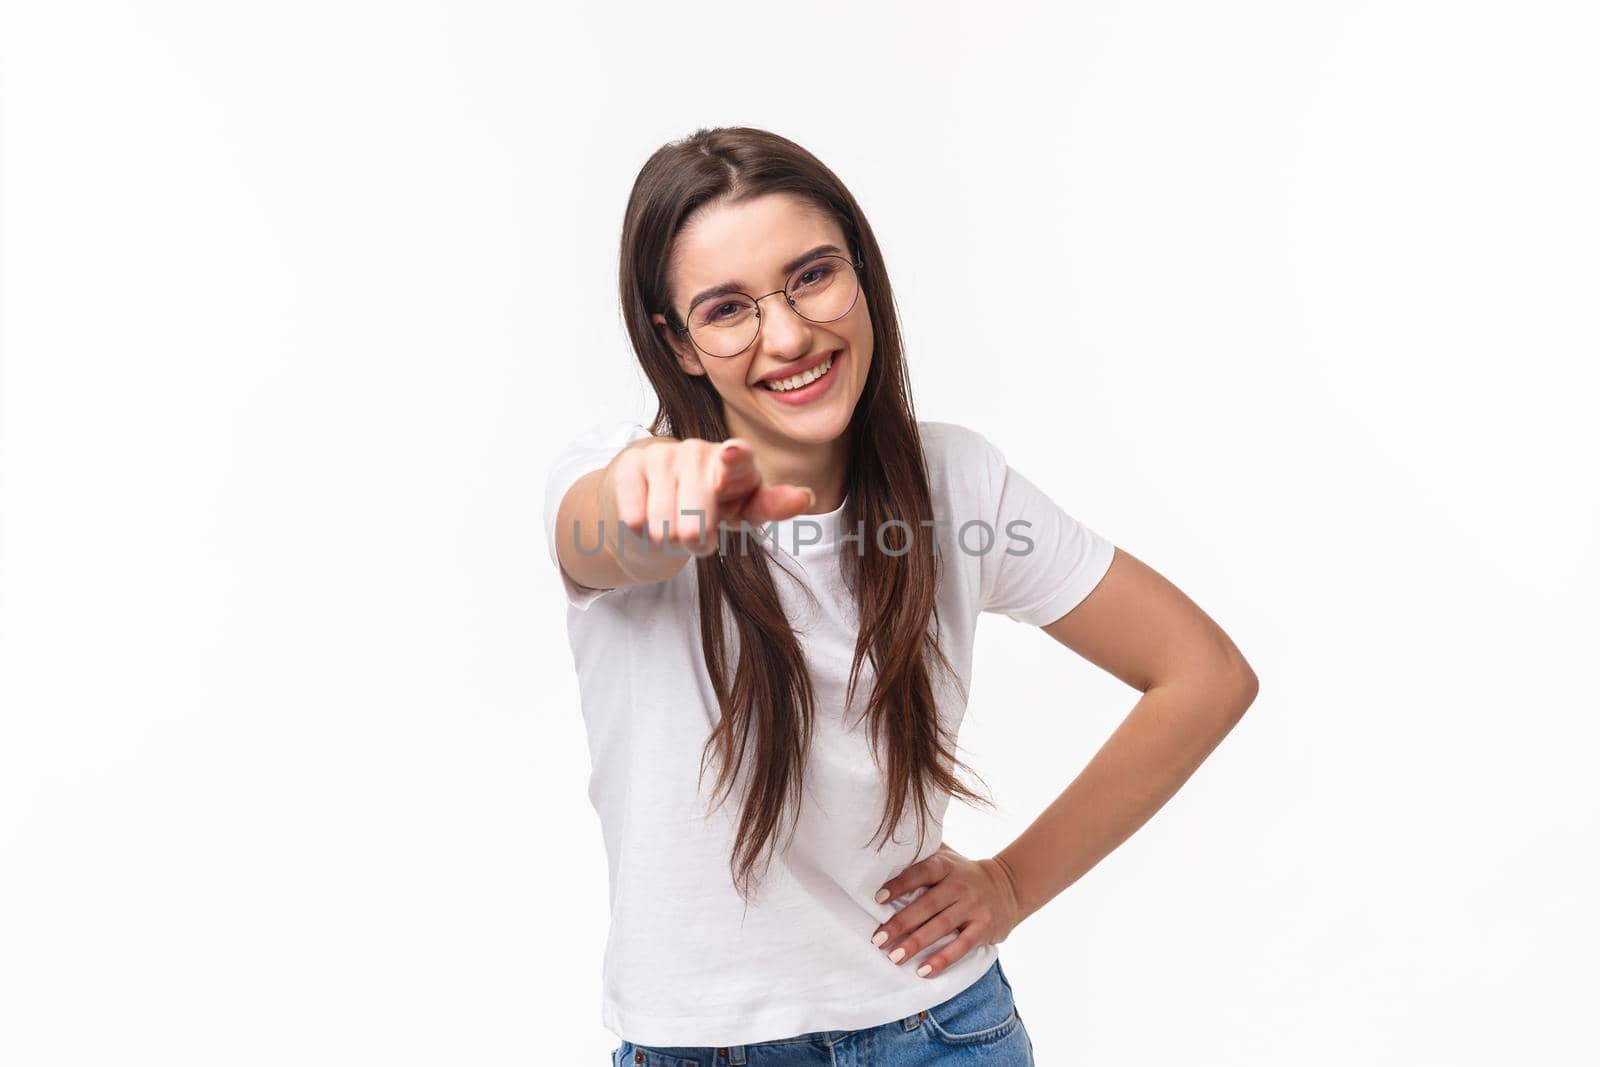 Waist-up portrait of enthusiastic, happy funny young woman 20s in t-shirt and glasses, laughing out loud having fun, pointing finger at camera as joking, choosing someone, make choice.